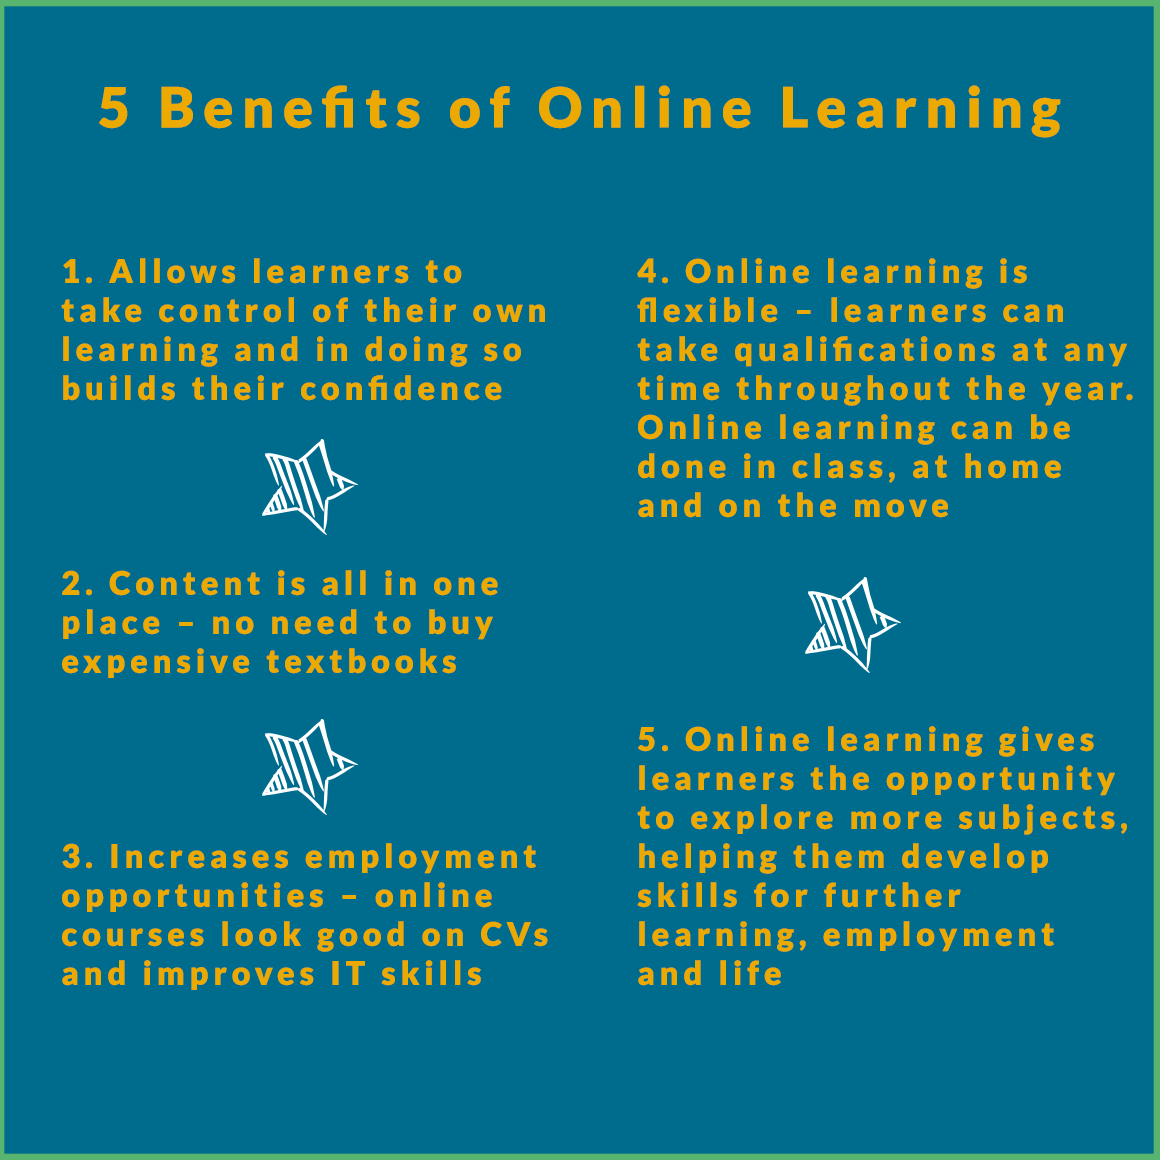 Supporting Learners through Online Enrichment